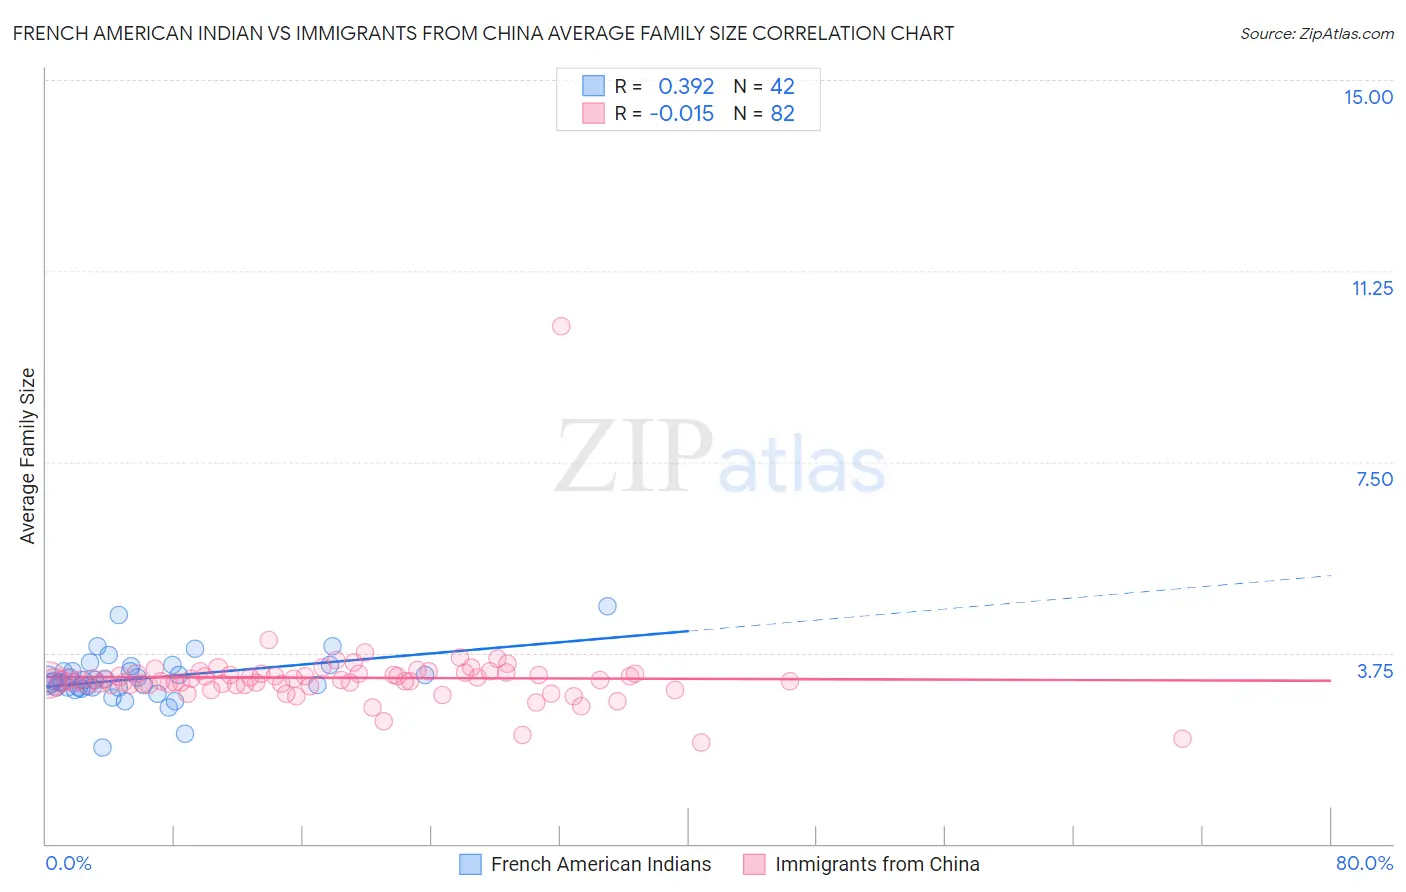 French American Indian vs Immigrants from China Average Family Size